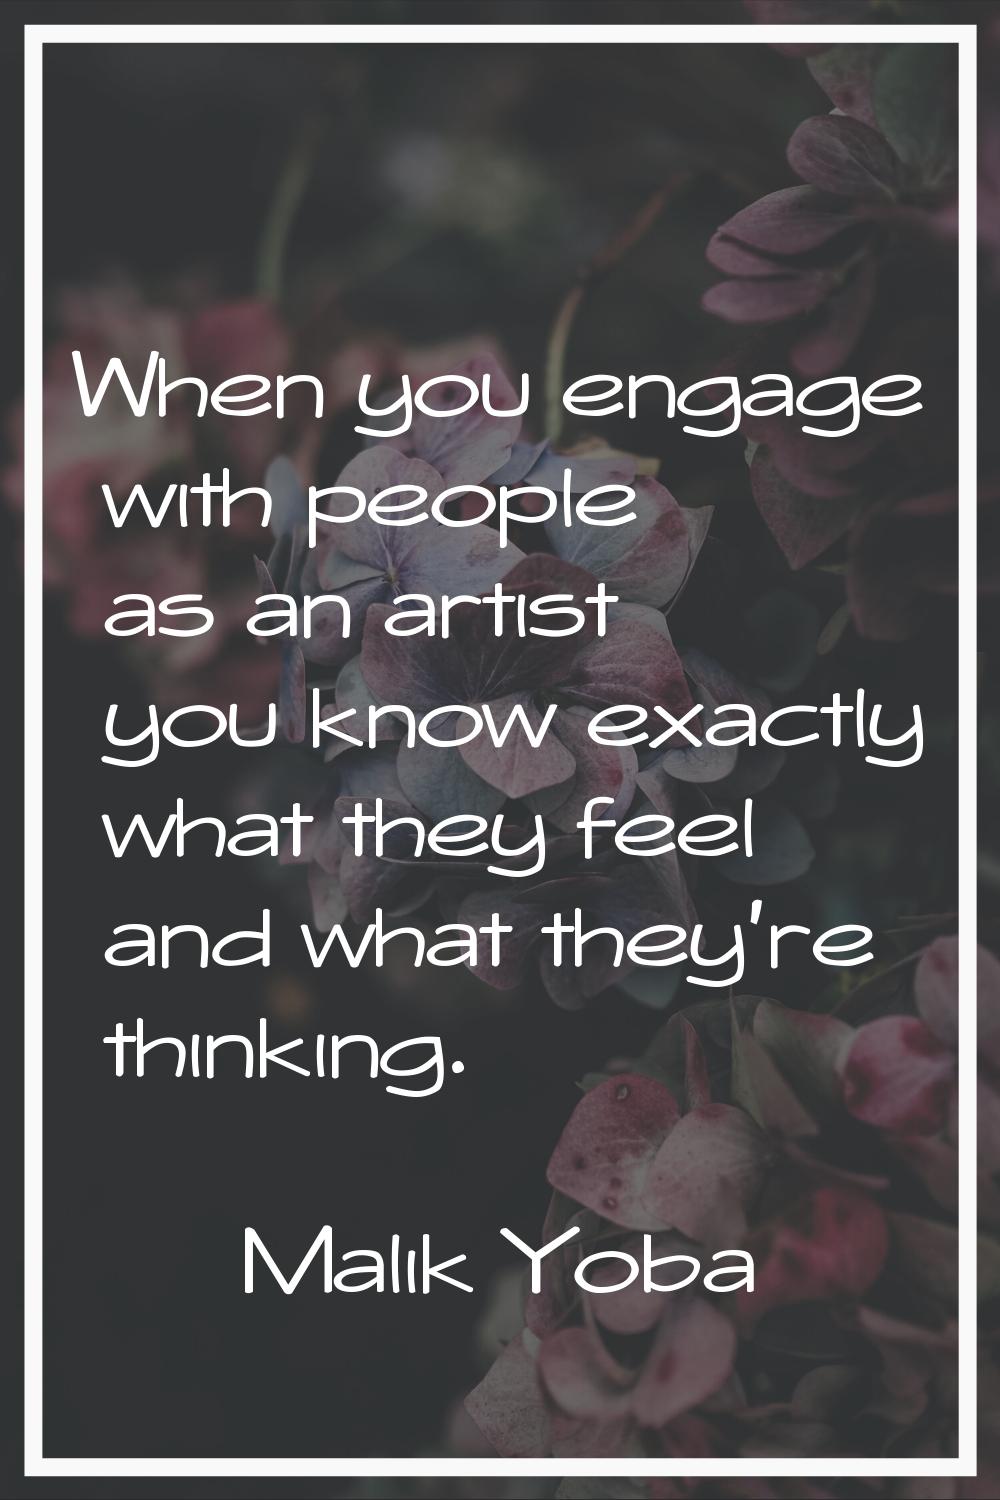 When you engage with people as an artist you know exactly what they feel and what they're thinking.